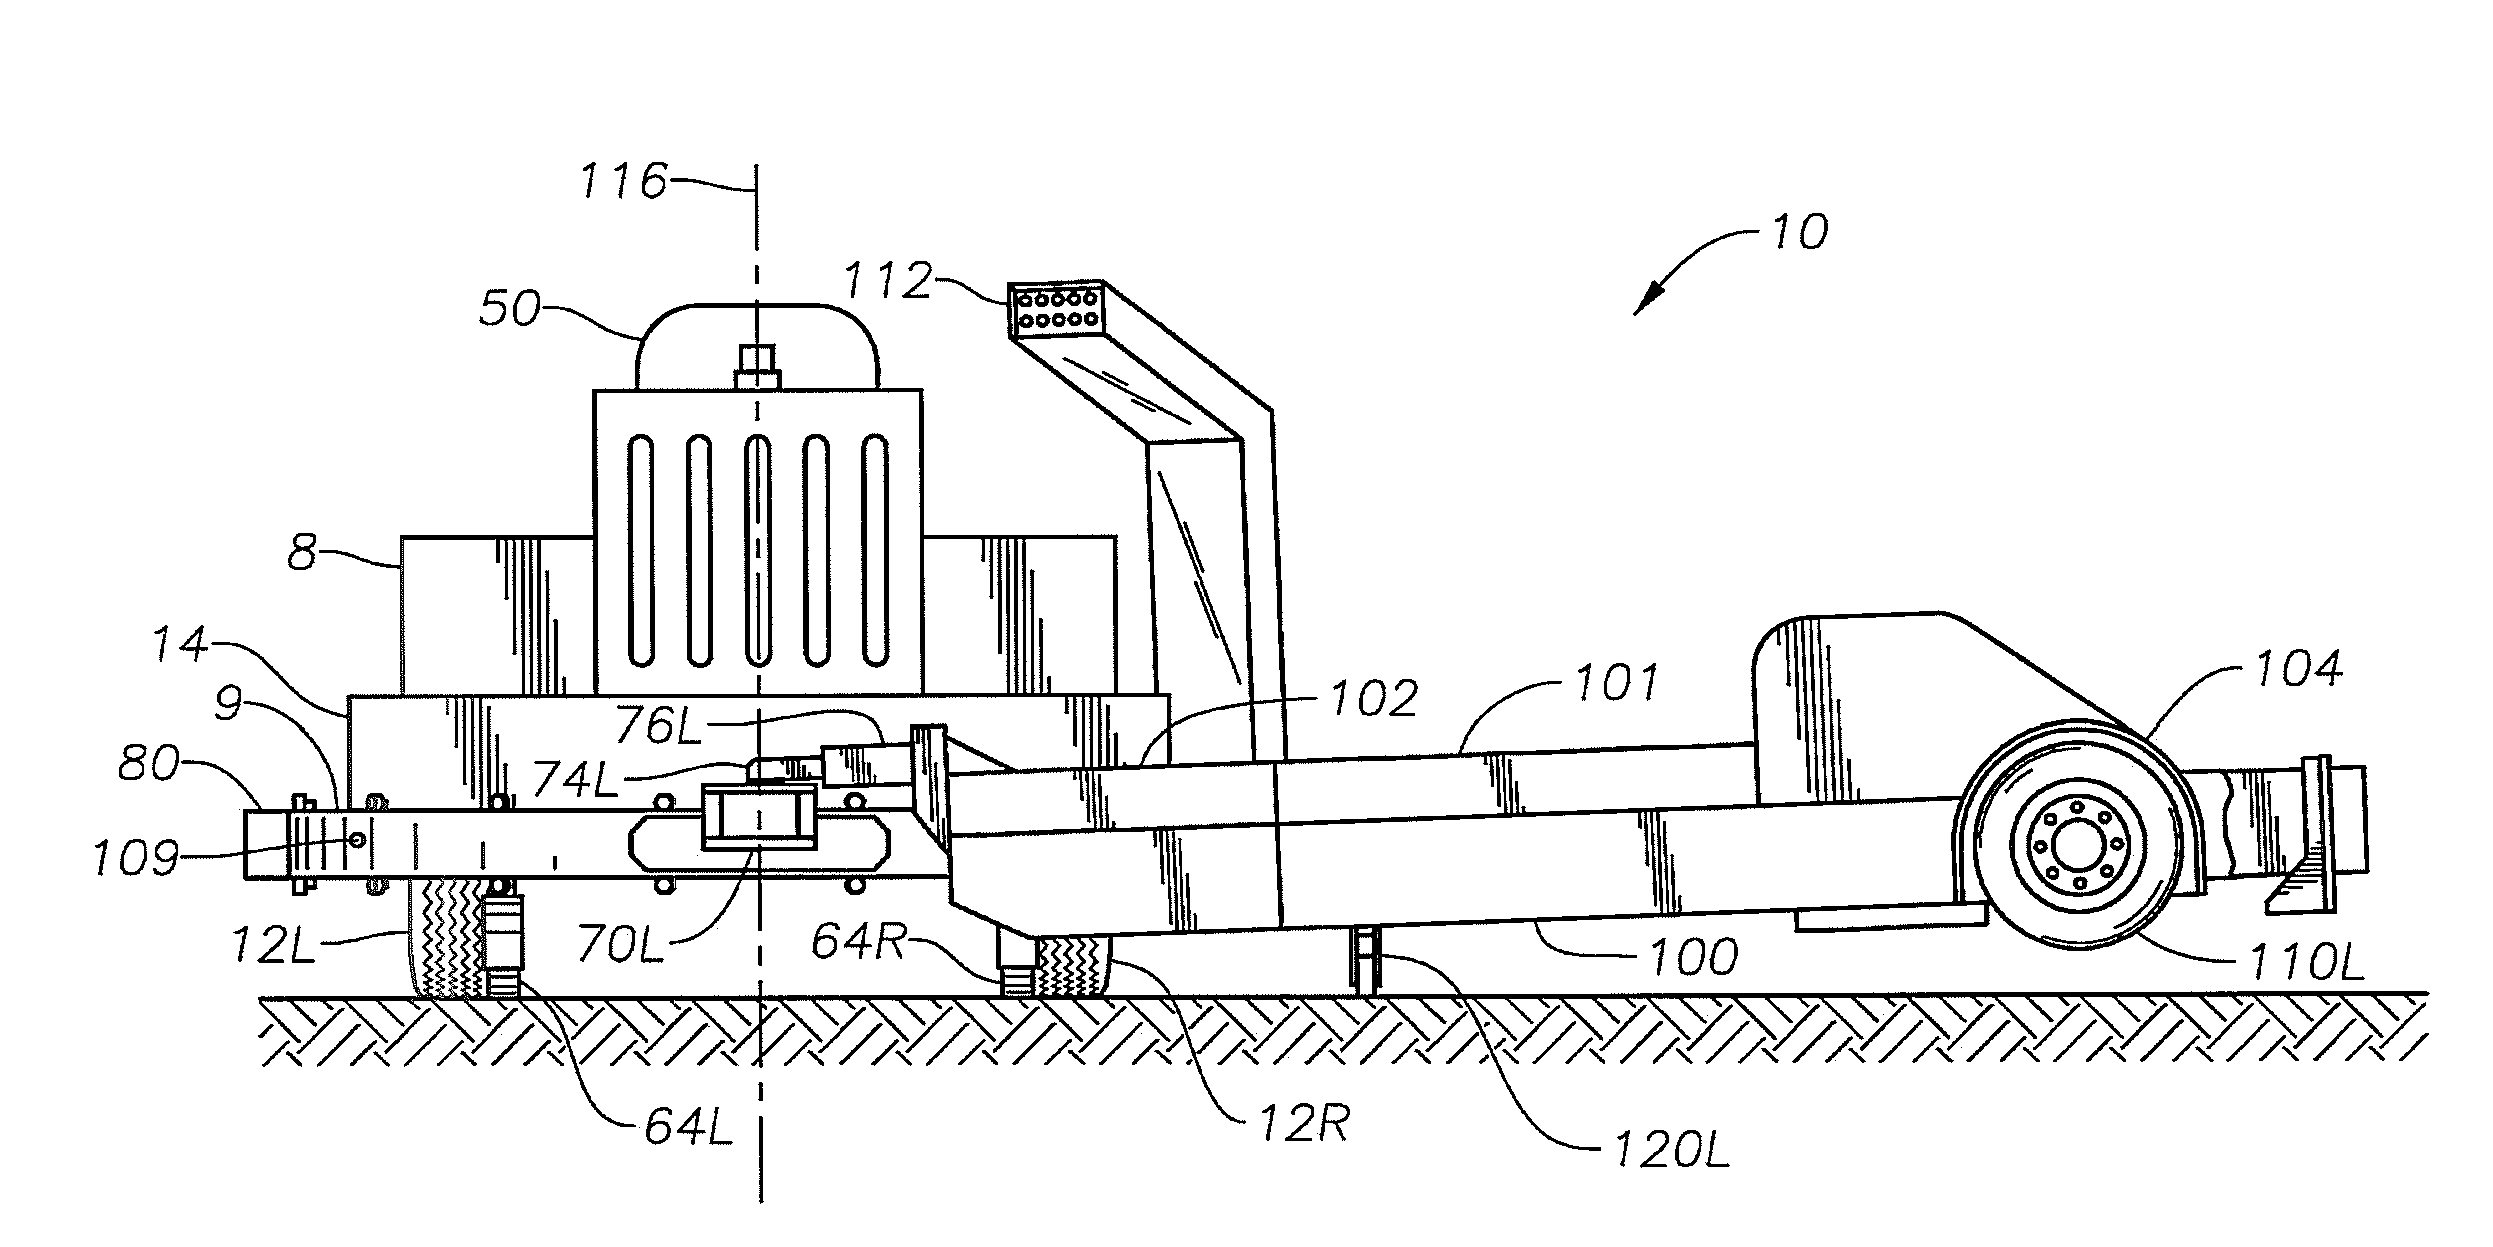 Omni-Directional Aircraft Transporter with Hinged Gate for Moving Aircraft